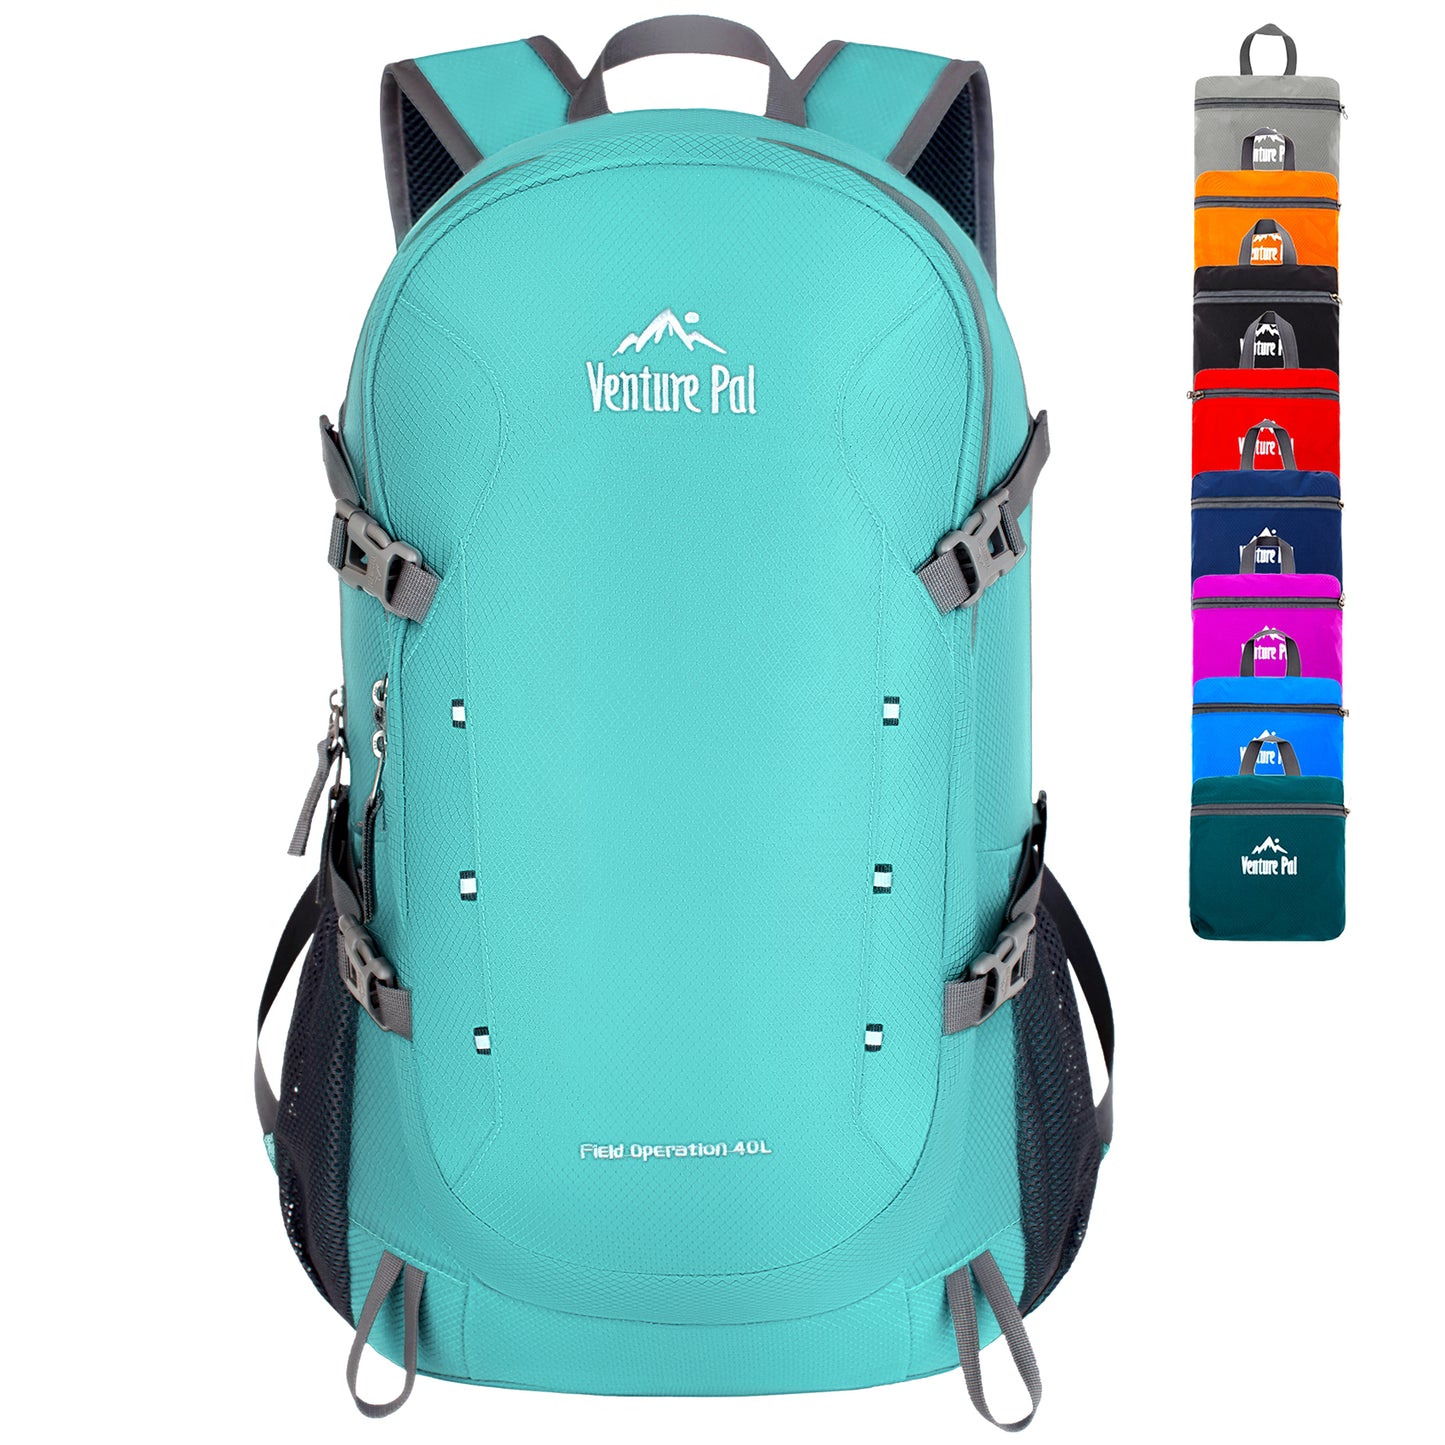 Venture Pal Mint Green 40L Nylon Backpack with Wet Pocket and Multi Compartment